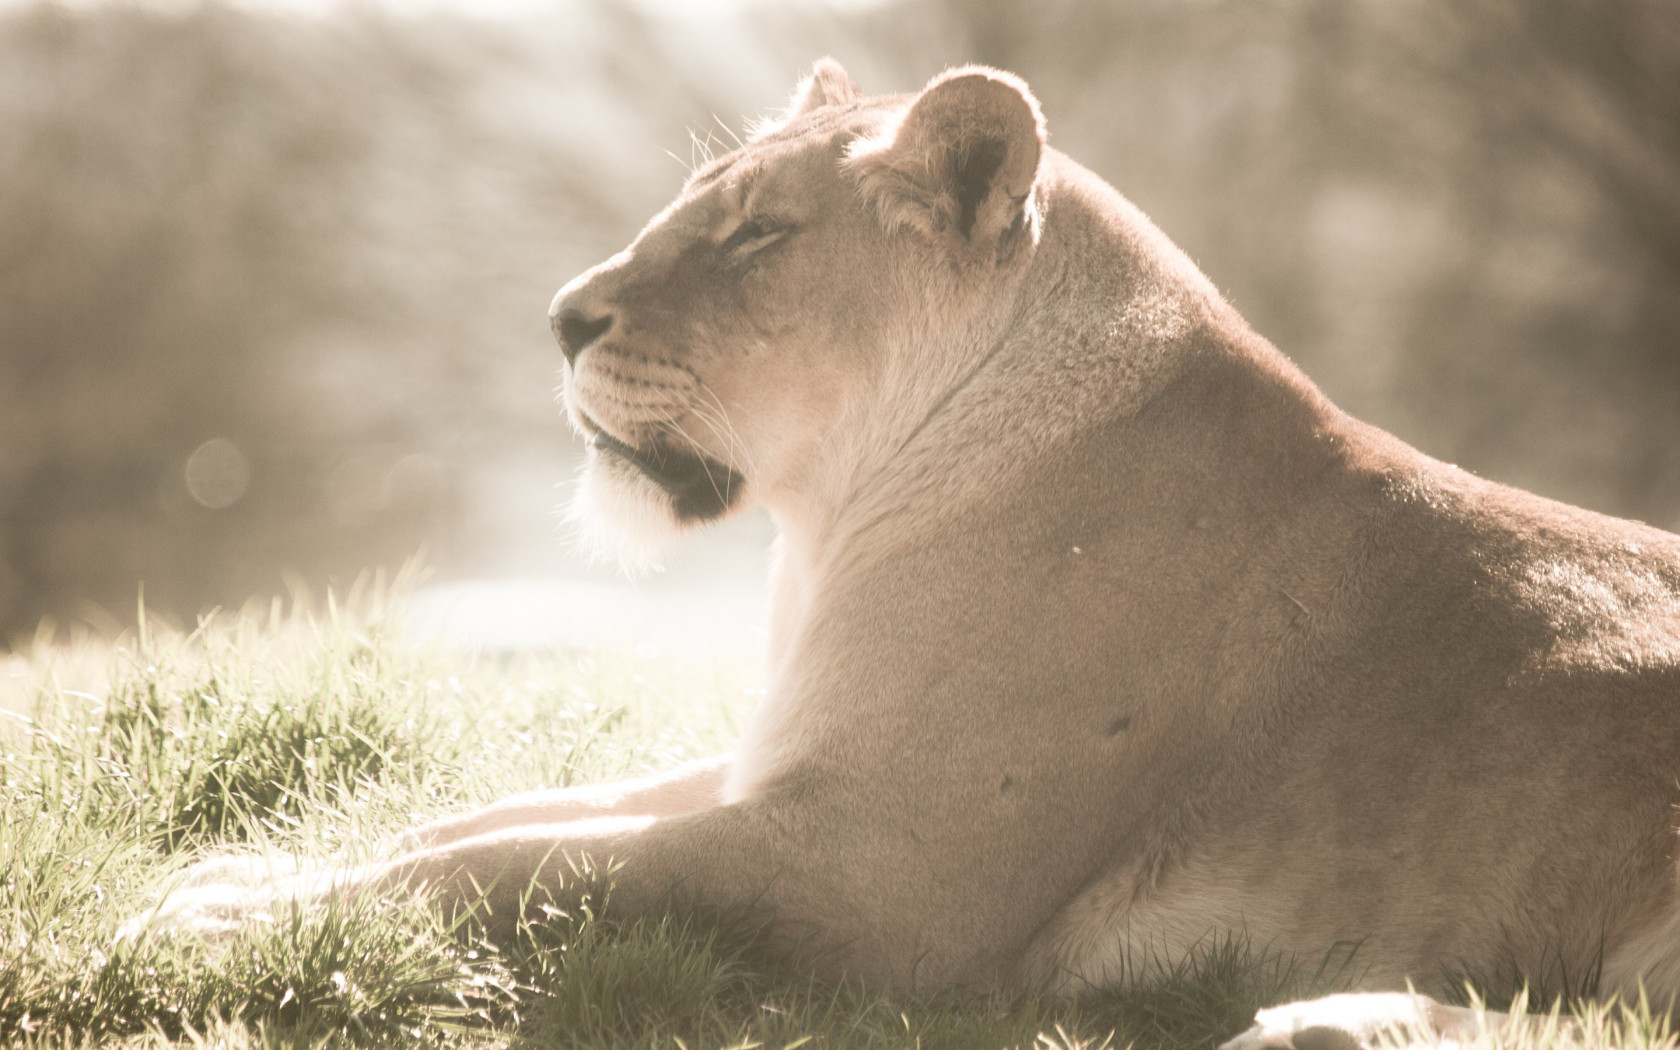 Lioness at Whipsnade Zoo wallpaper 1680x1050